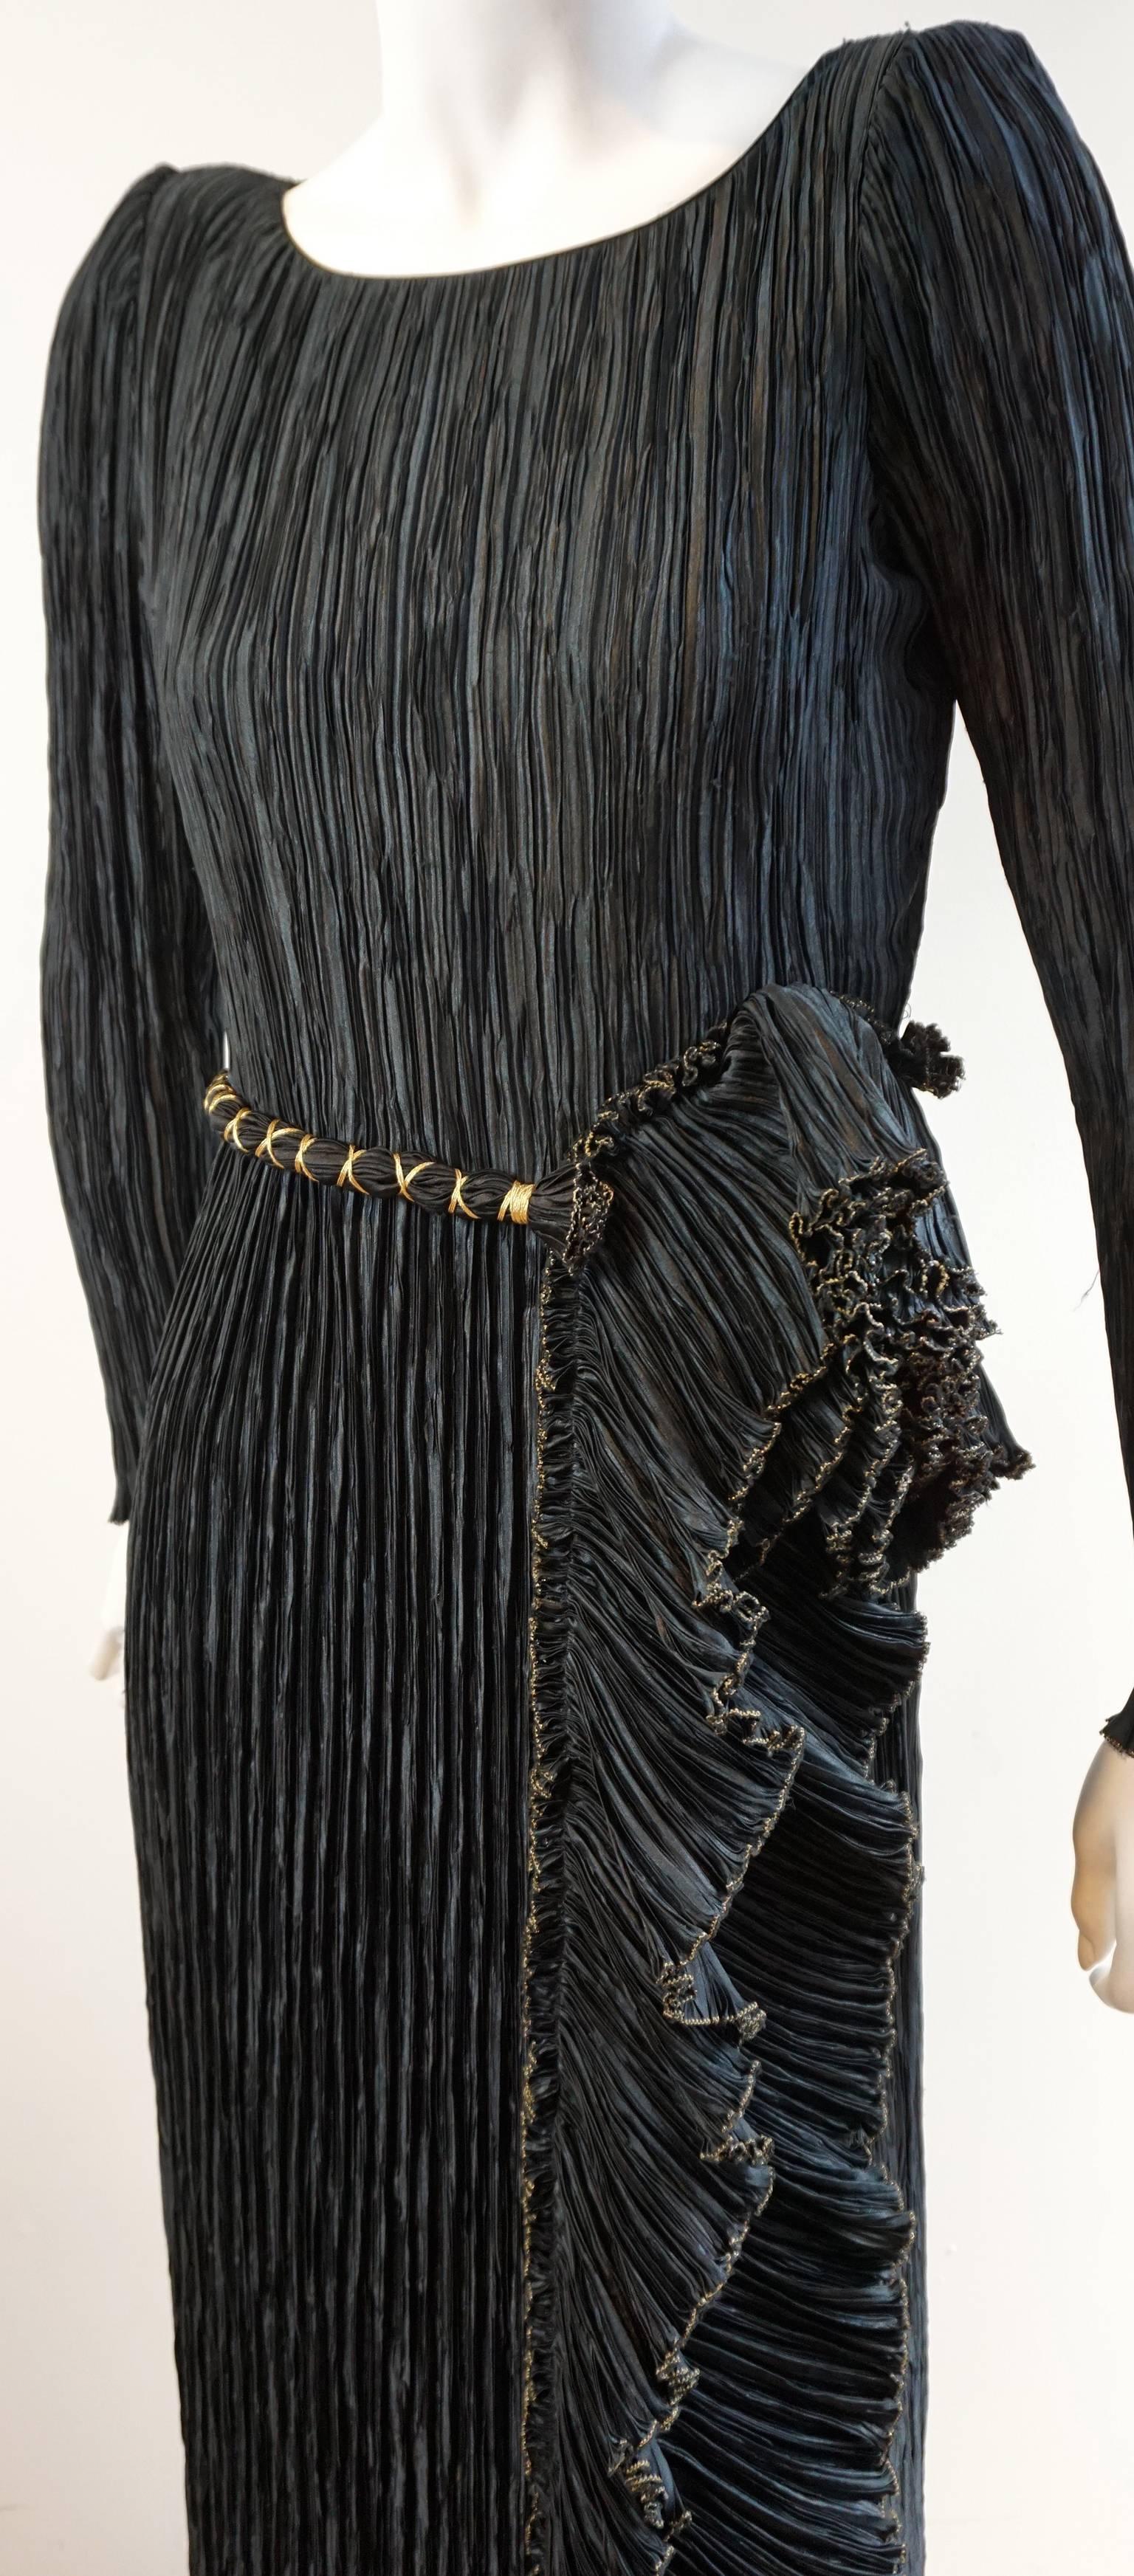 Comprised of the quintessential McFadden pleating, this gown features long sleeves with slight padding at the shoulders. The waist is highlighted with a black and gold rope belt with frayed edge. It is attached along the front and secured with a